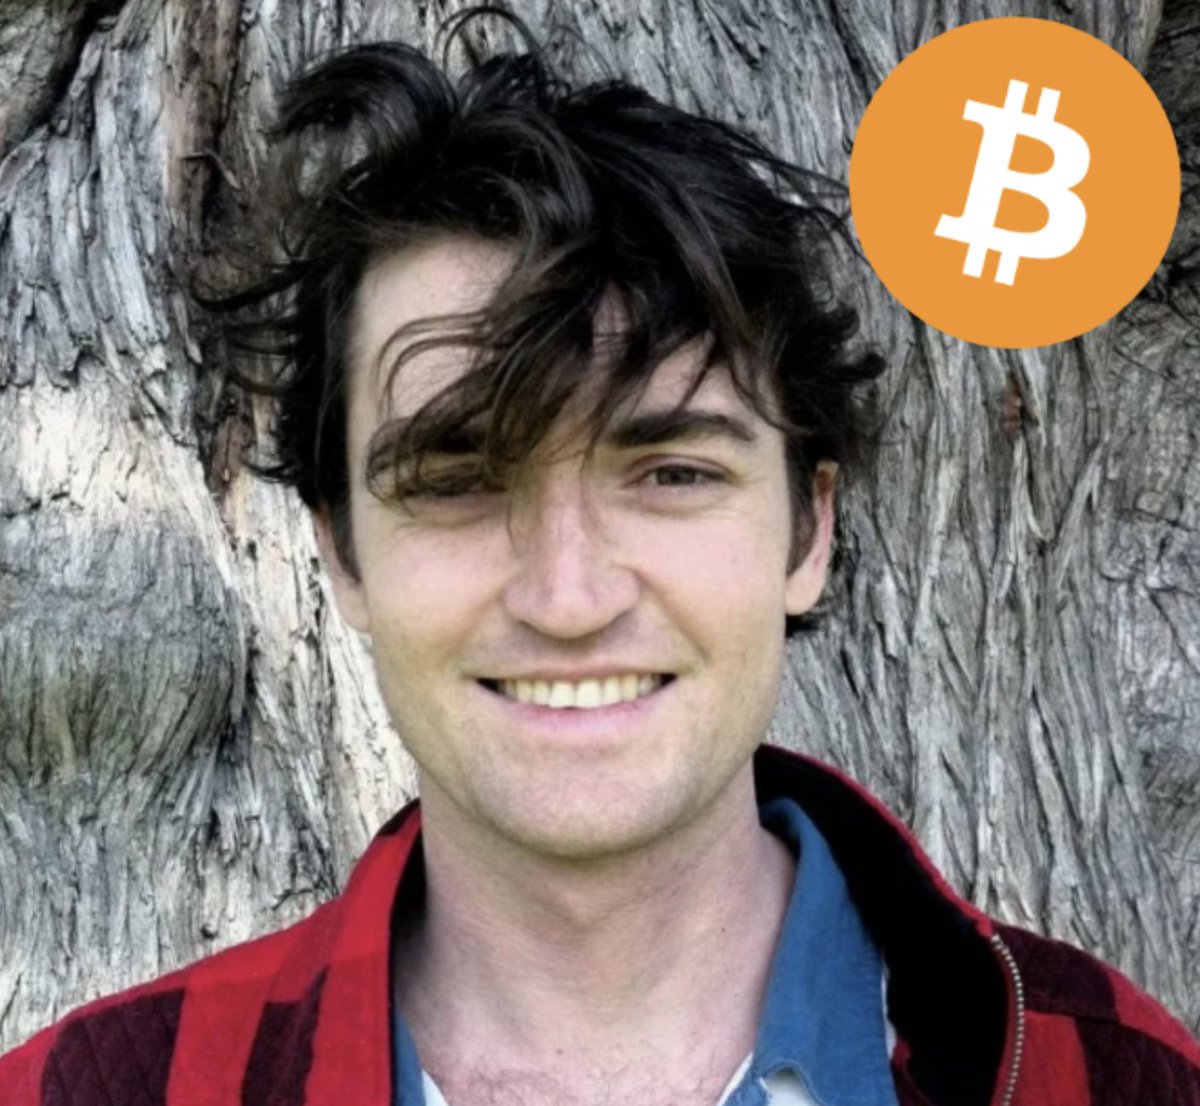 JUST IN: 🇺🇸 Donald Trump vows to commute the sentence of Ross Ulbricht to time served if elected President. 'He's already served 11 years. We're going to get him home.'